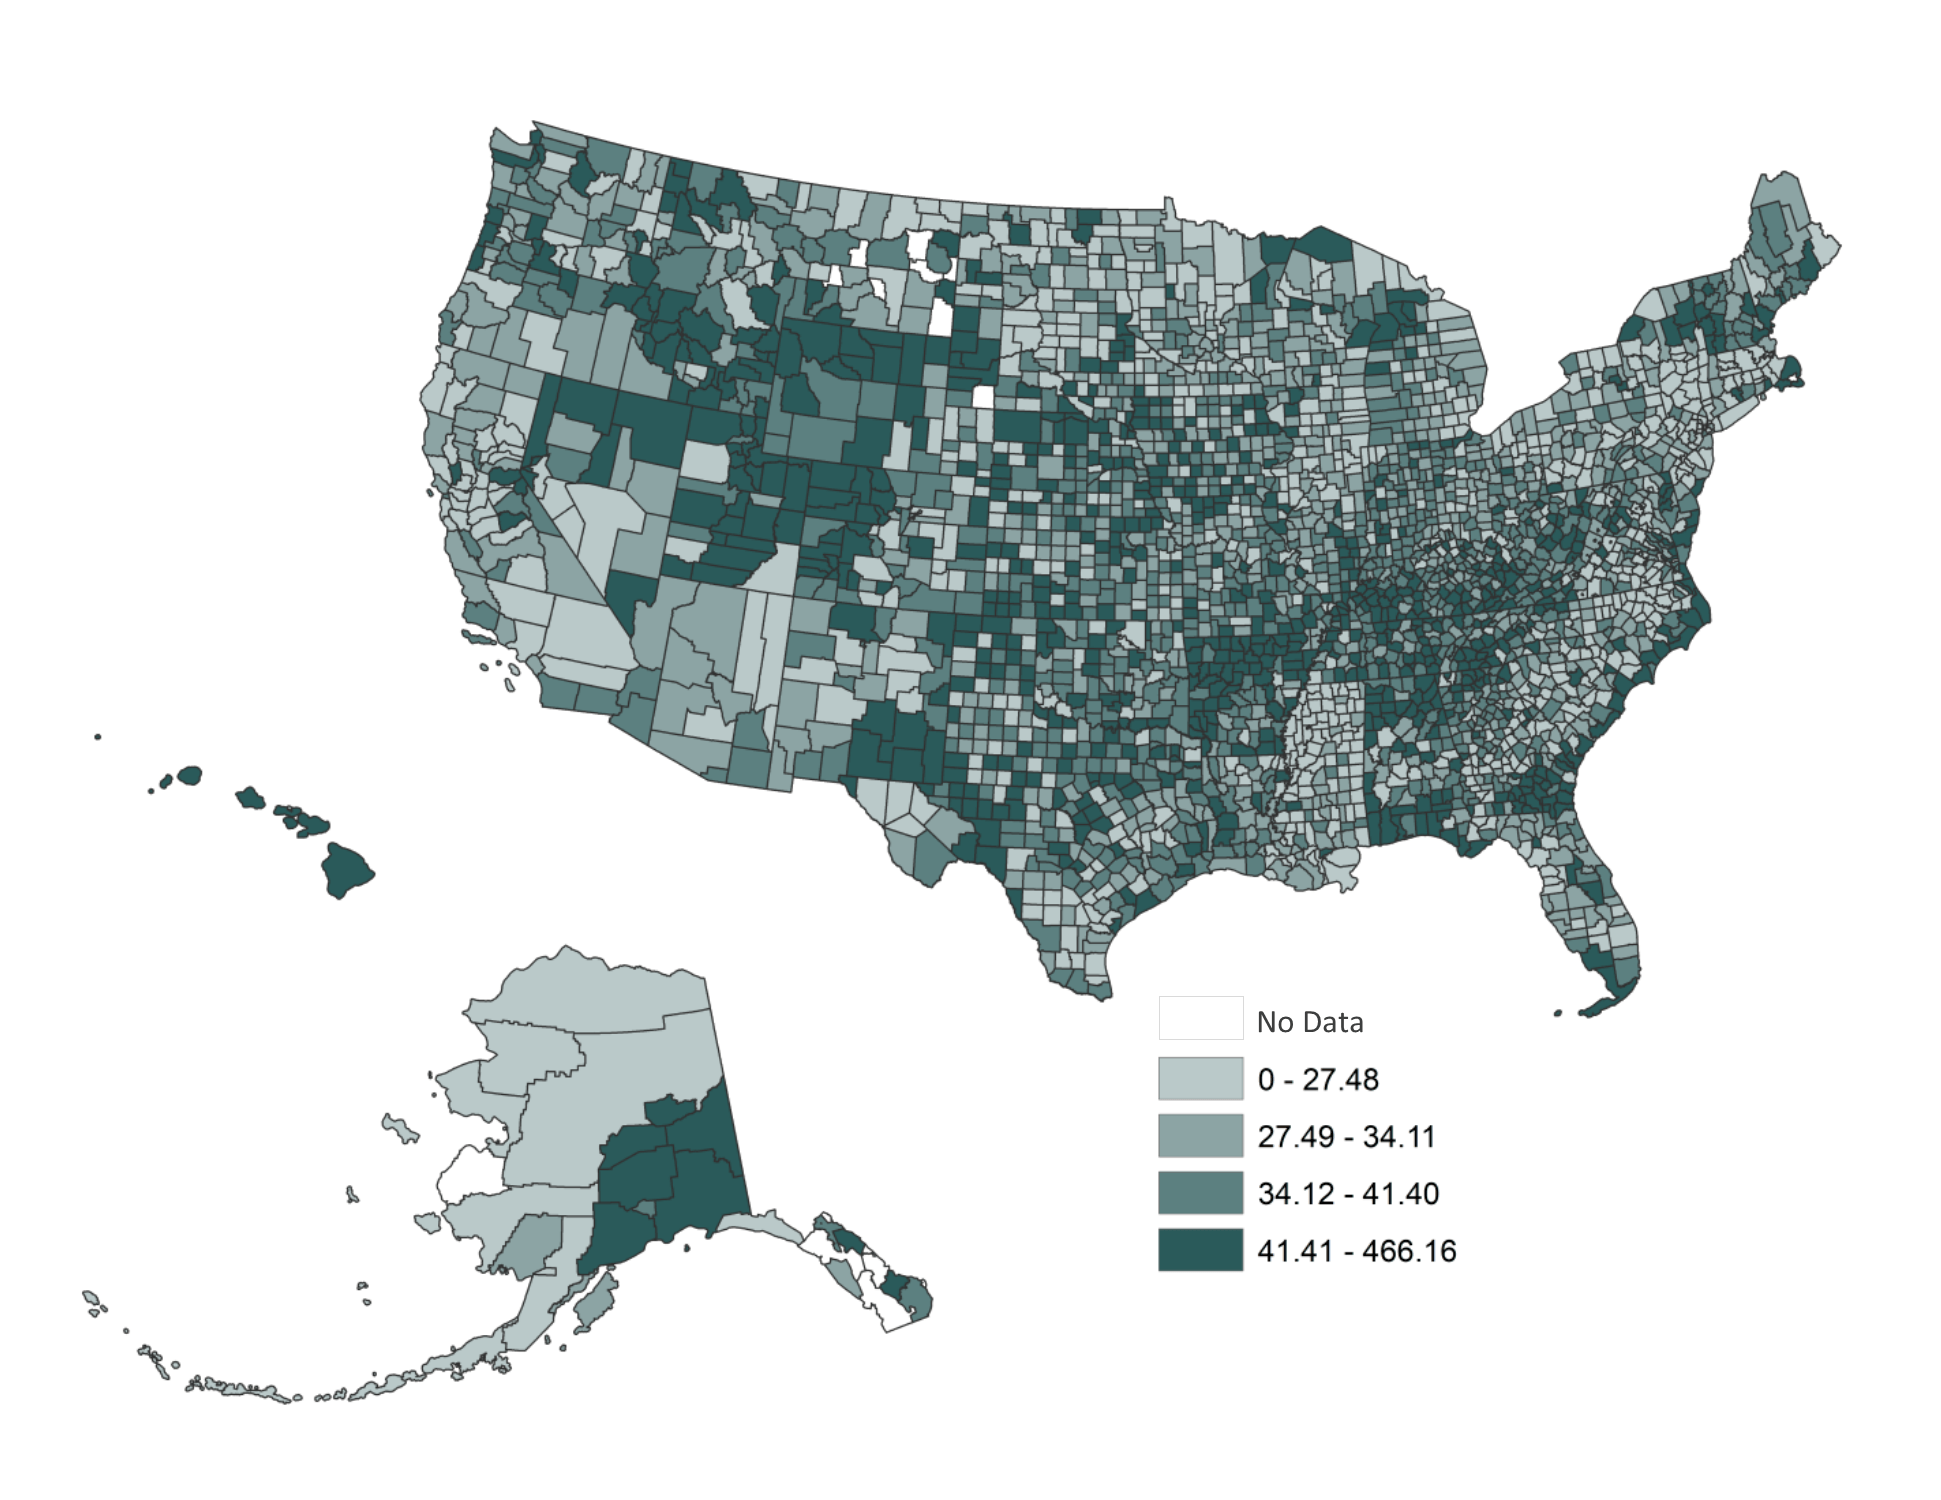 US map in shades of teal showing Figure 1 presents county-level adjusted marriage rates per 1,000 unmarried persons by quartile in the U.S. in 2010.